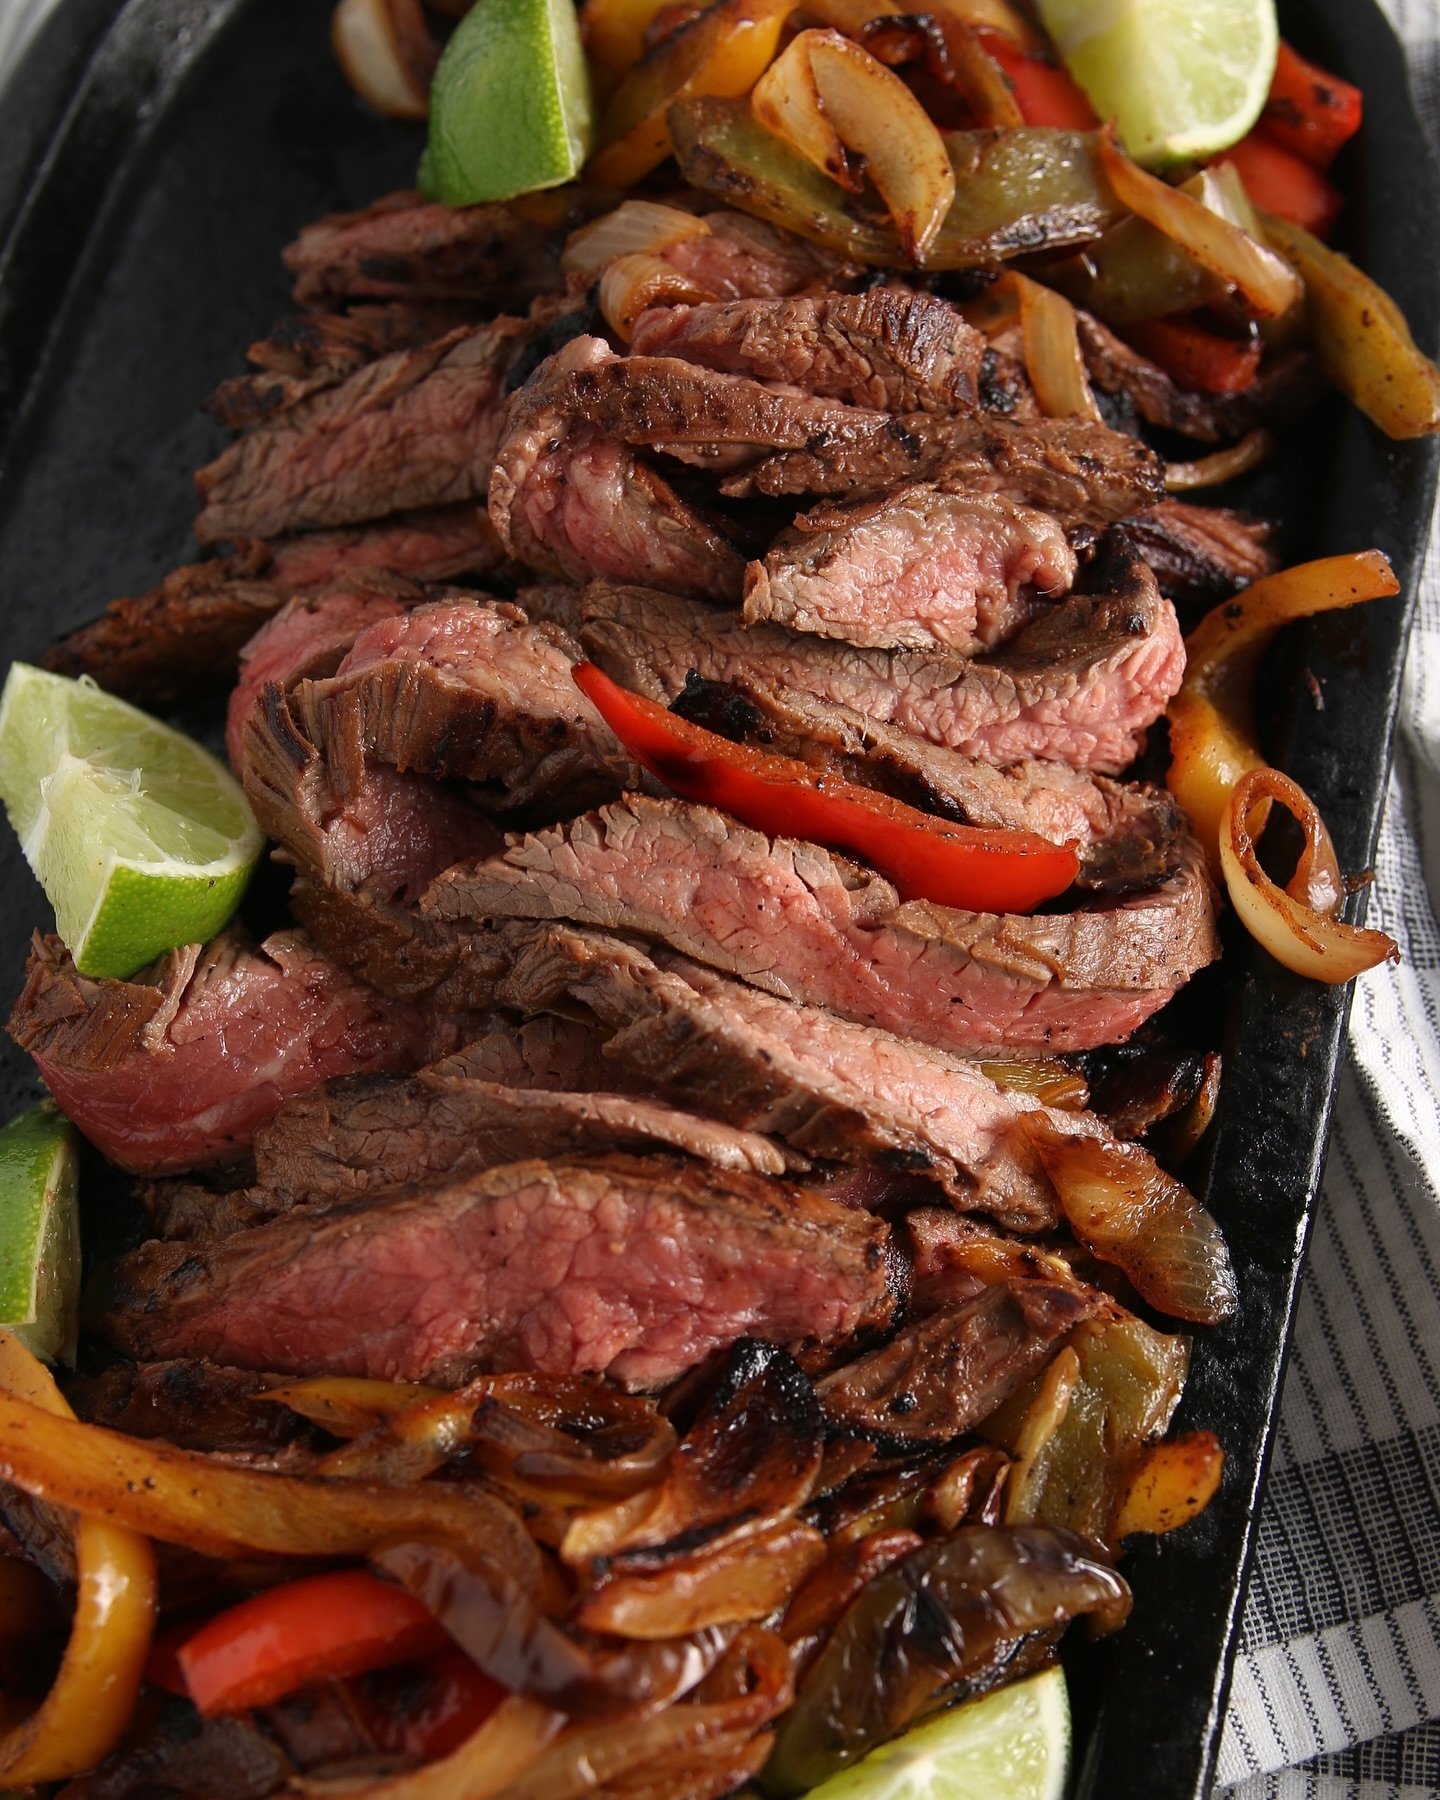 It&rsquo;s grilling season and today it&rsquo;s all about fajitas!  My recipe is available for you on my website and in my cookbook, My South Texas Kitchen. You&rsquo;re going to love the grilled veggies so double on those!! 🔥 ✨ #fajitas #mysouthtex